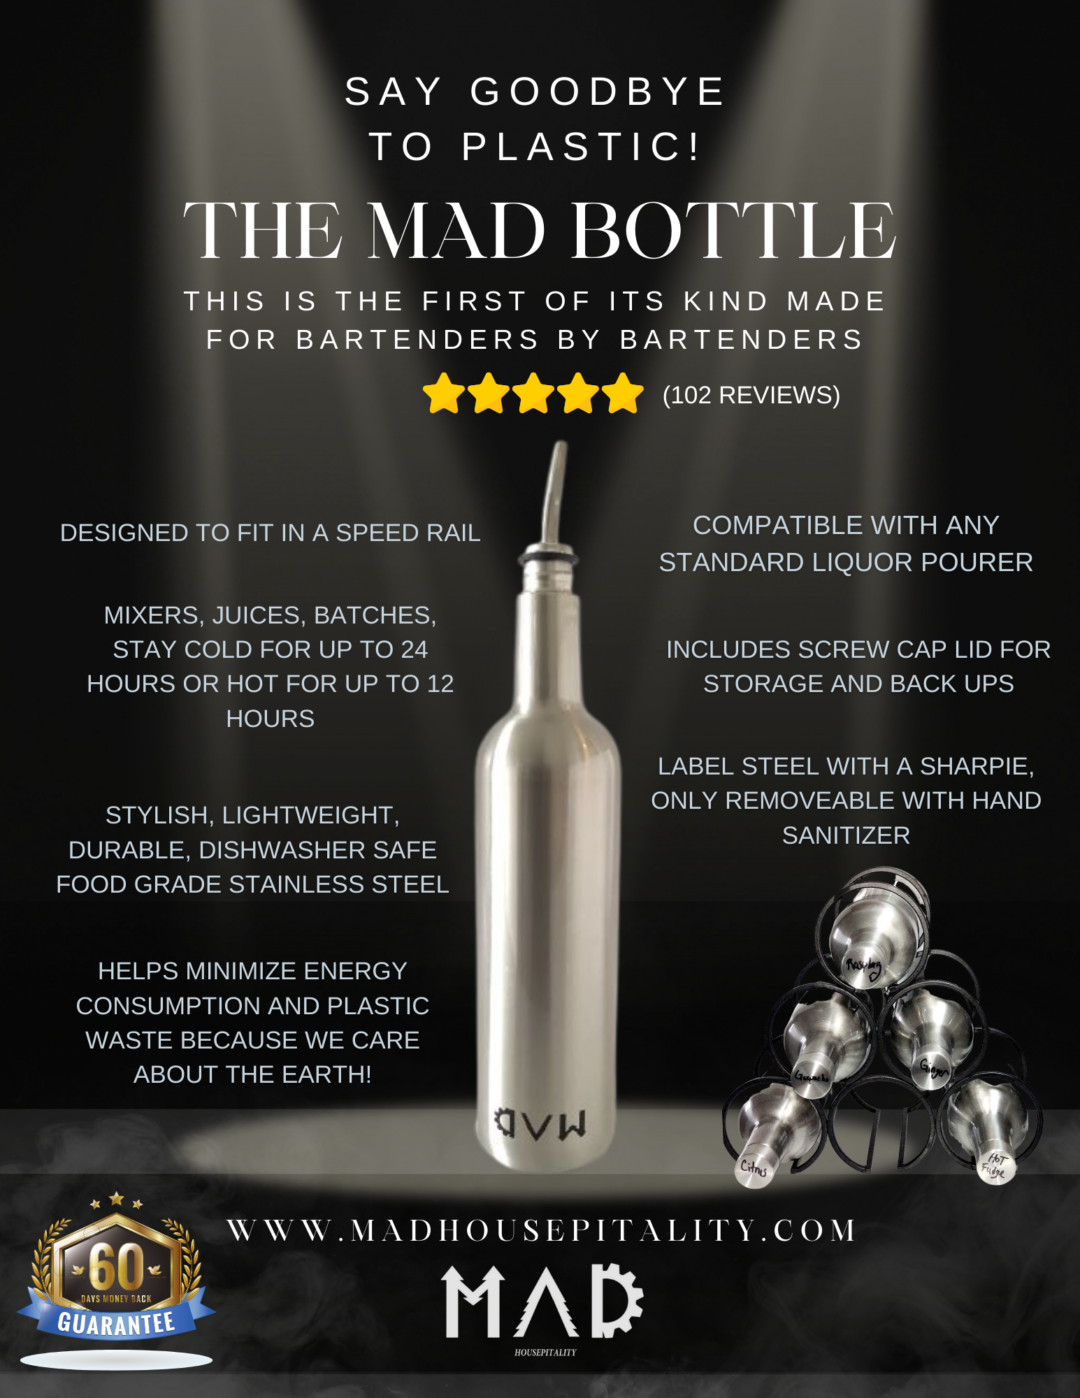 The MAD Bottle is a Stainless Steel Storage and Pourer Container for Bars that Maintains Temperature